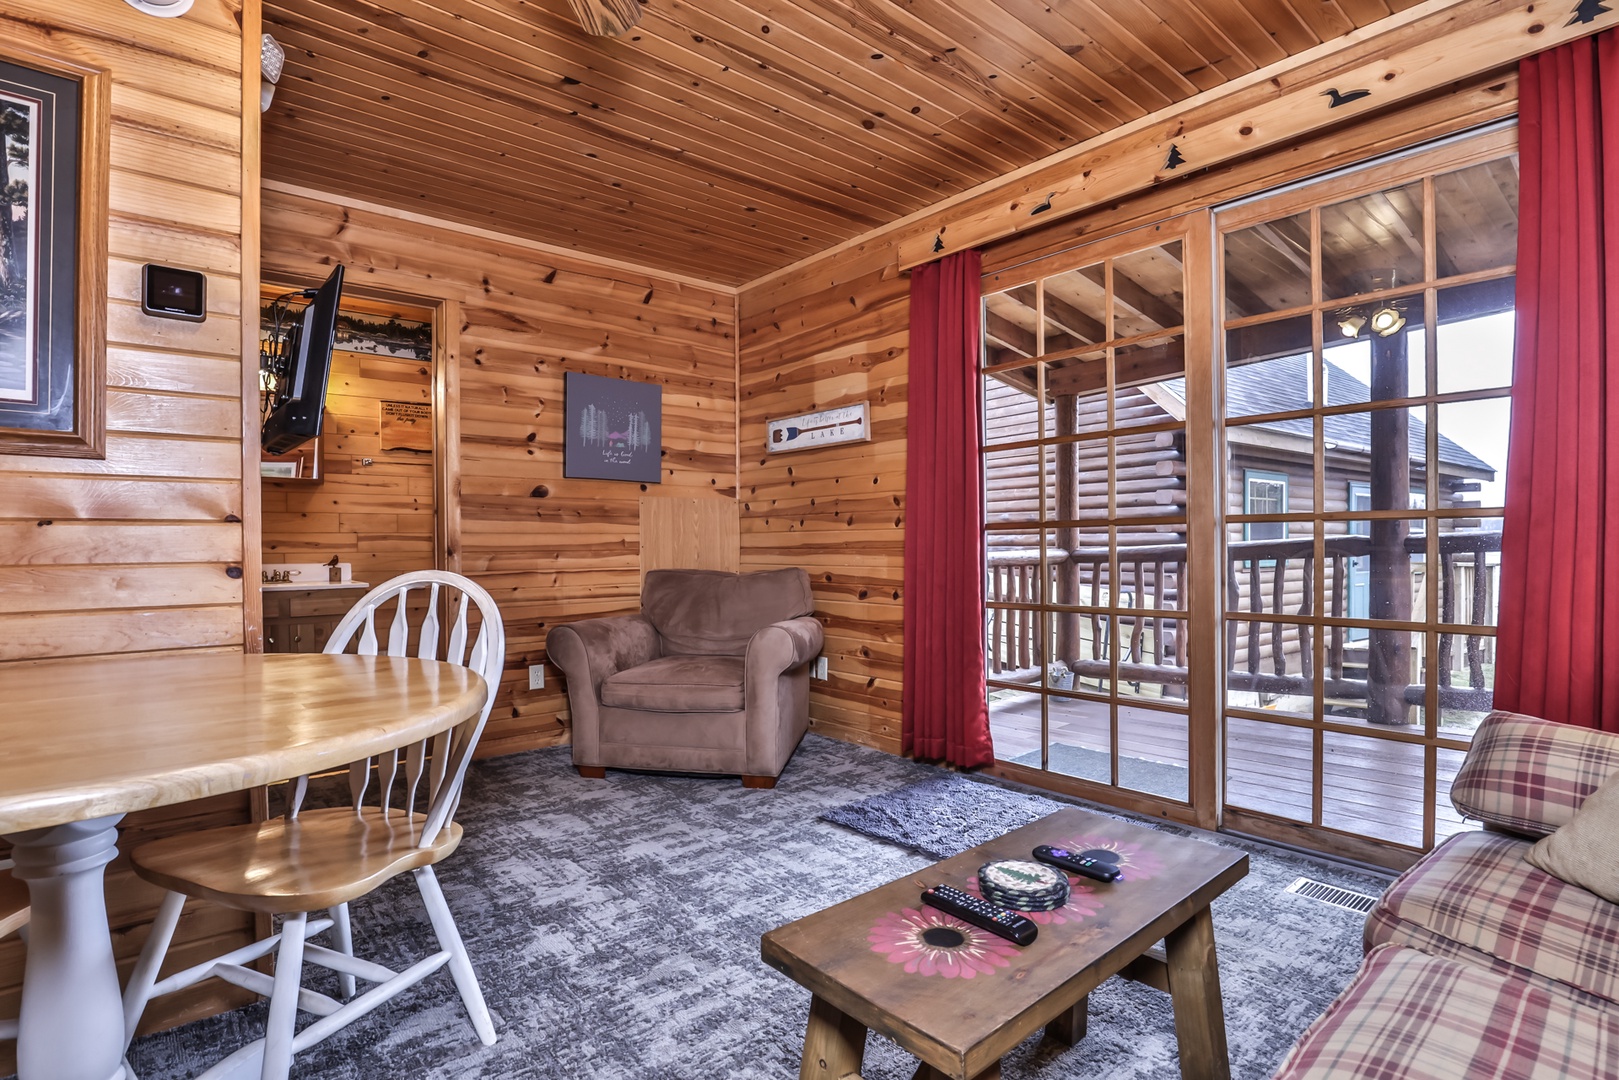 Loon Cabin - Wilderness Bay Lodge - Hiller Vacation Homes